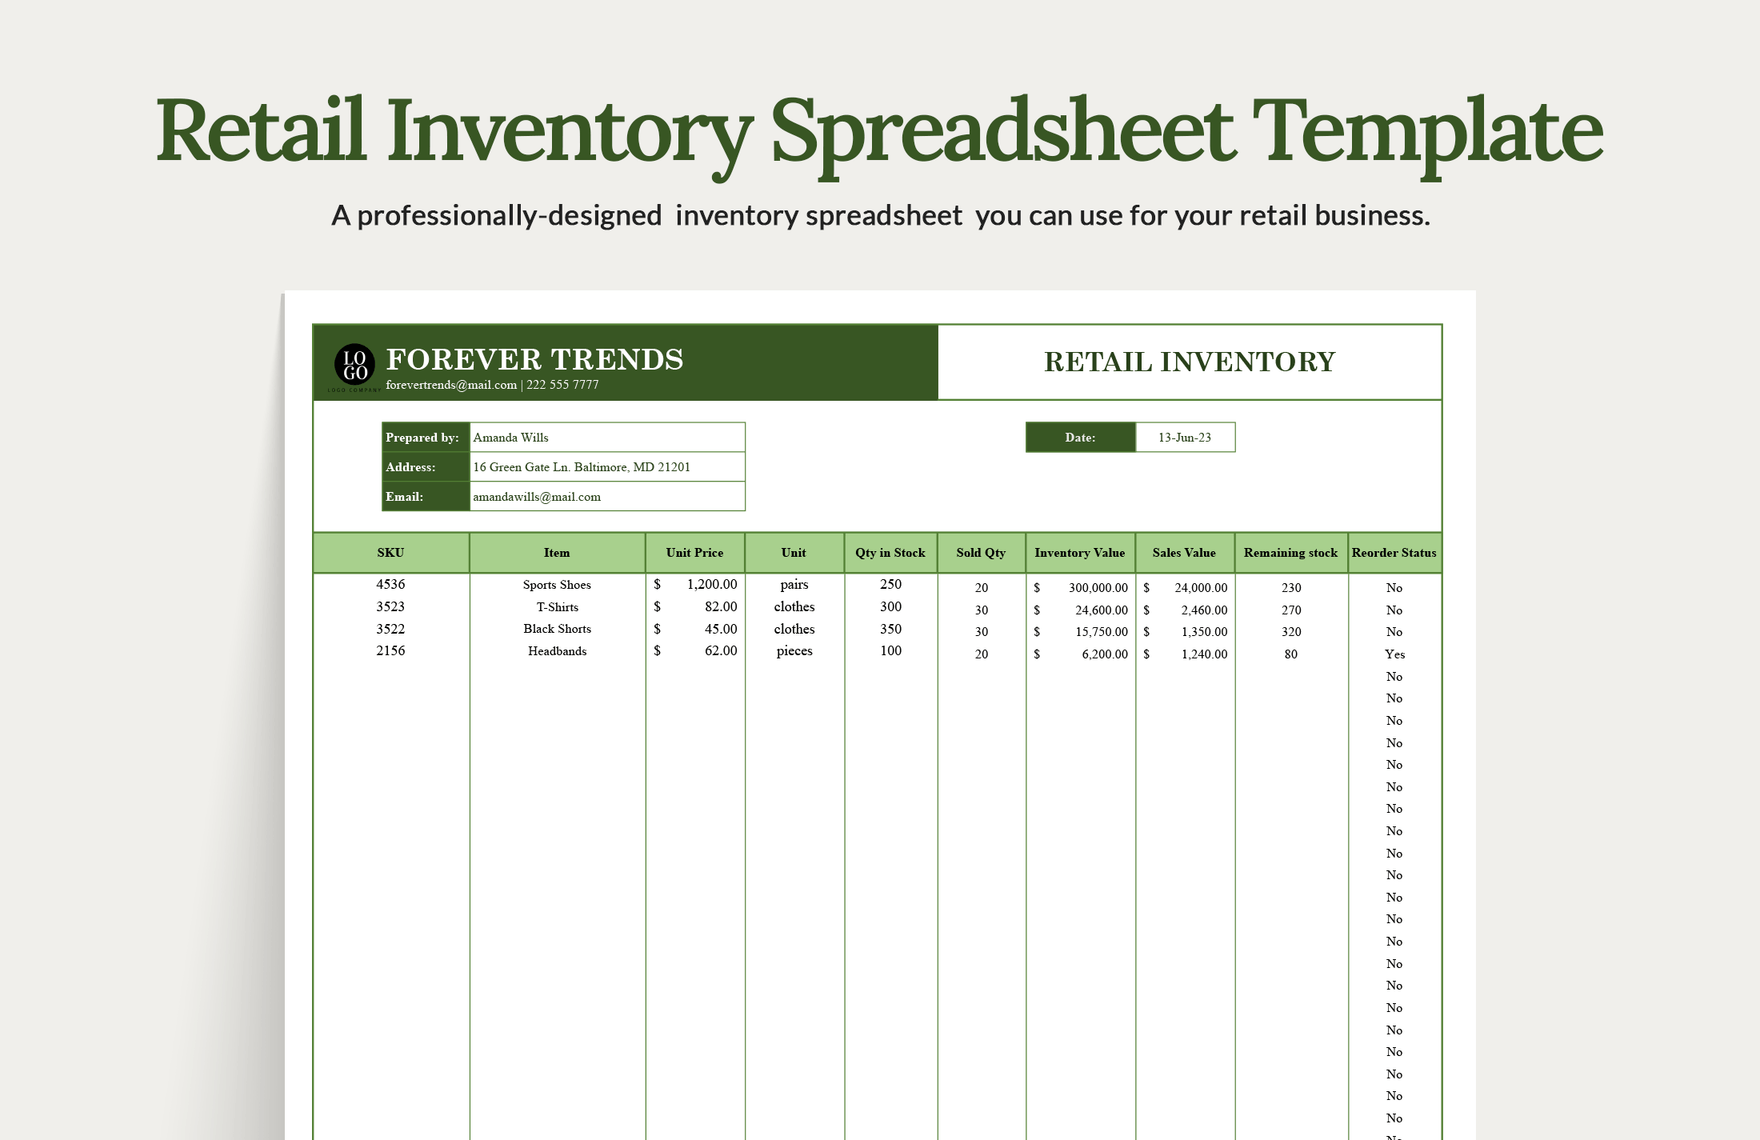 Retail Inventory Spreadsheet Template in Word, Google Docs, Excel, PDF, Google Sheets, Apple Pages, Apple Numbers